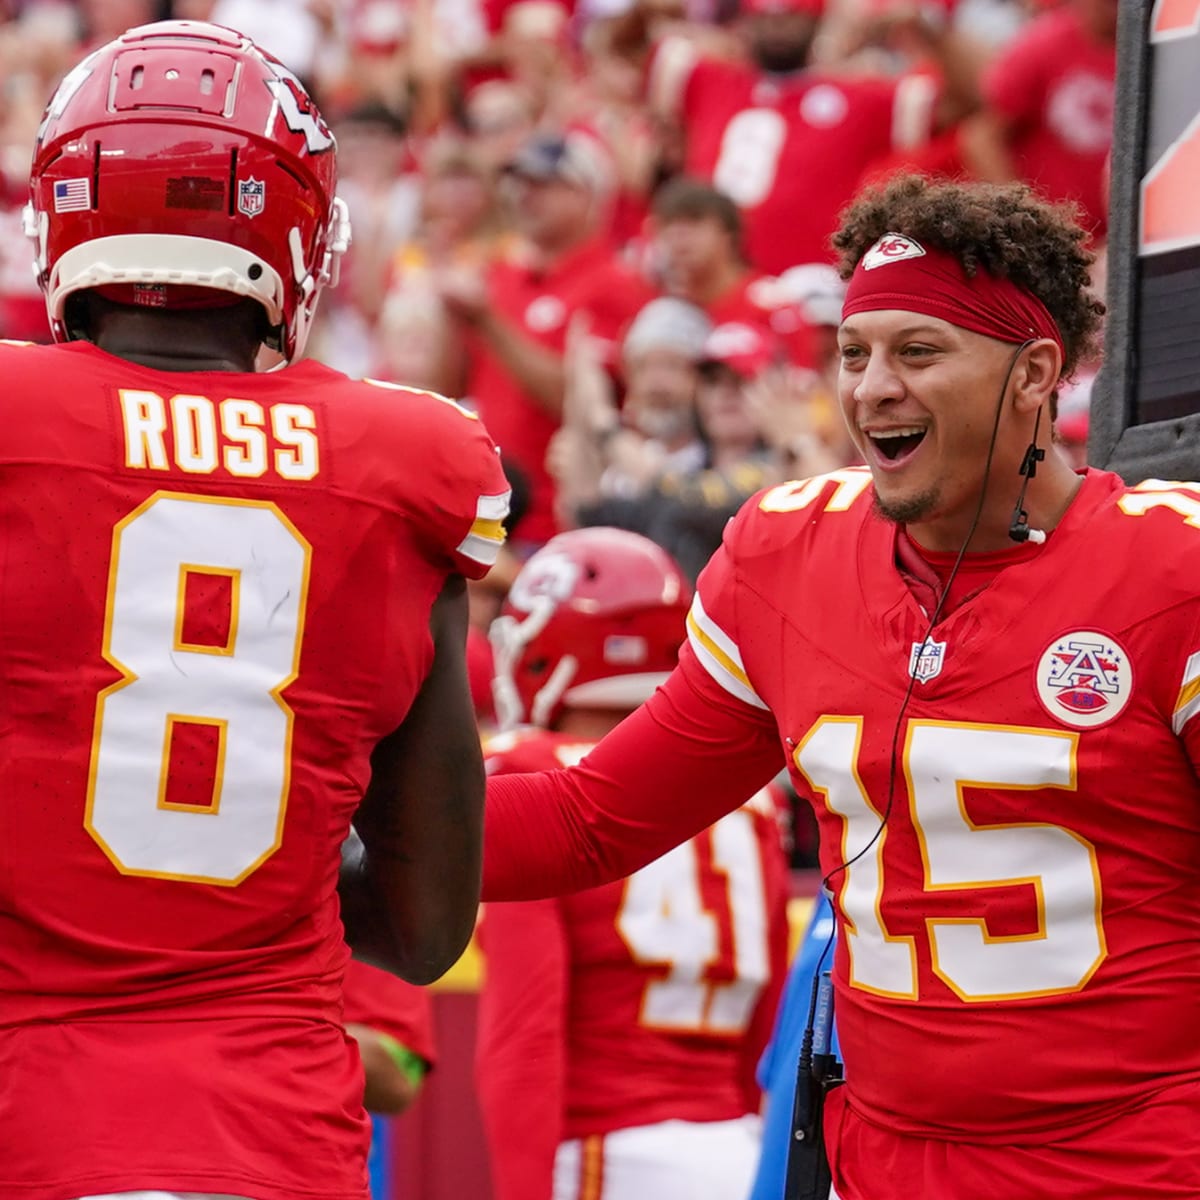 The Chiefs have won 8 straight season openers. They have a ways to